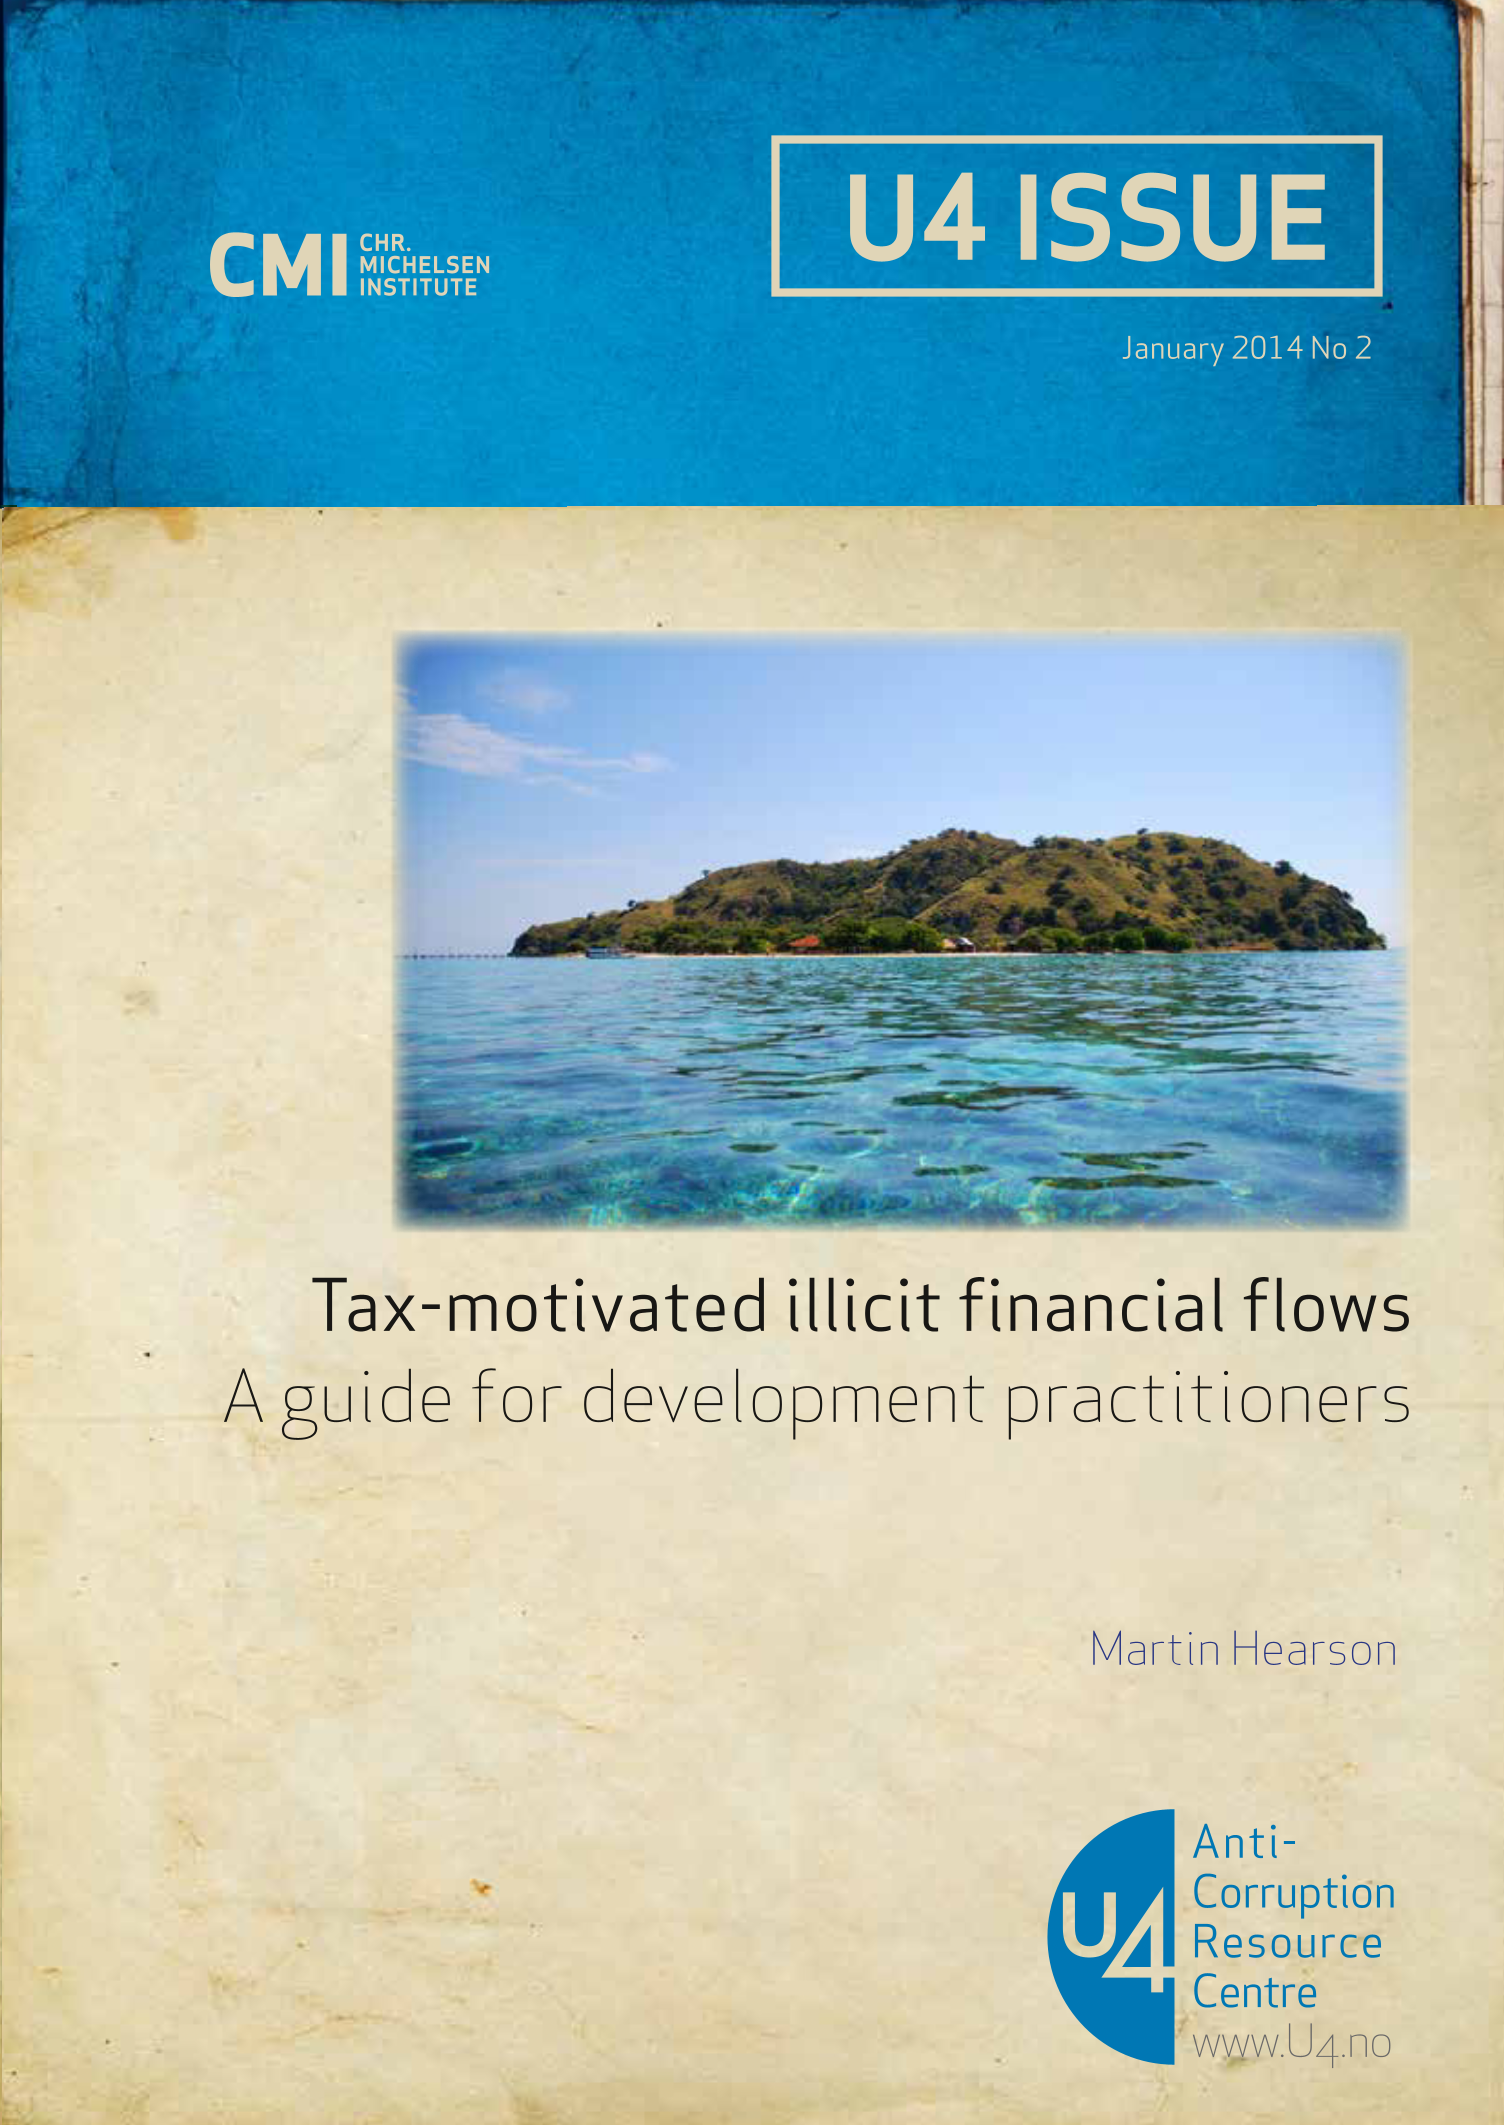 Tax-motivated illicit financial flows: A guide for development practitioners